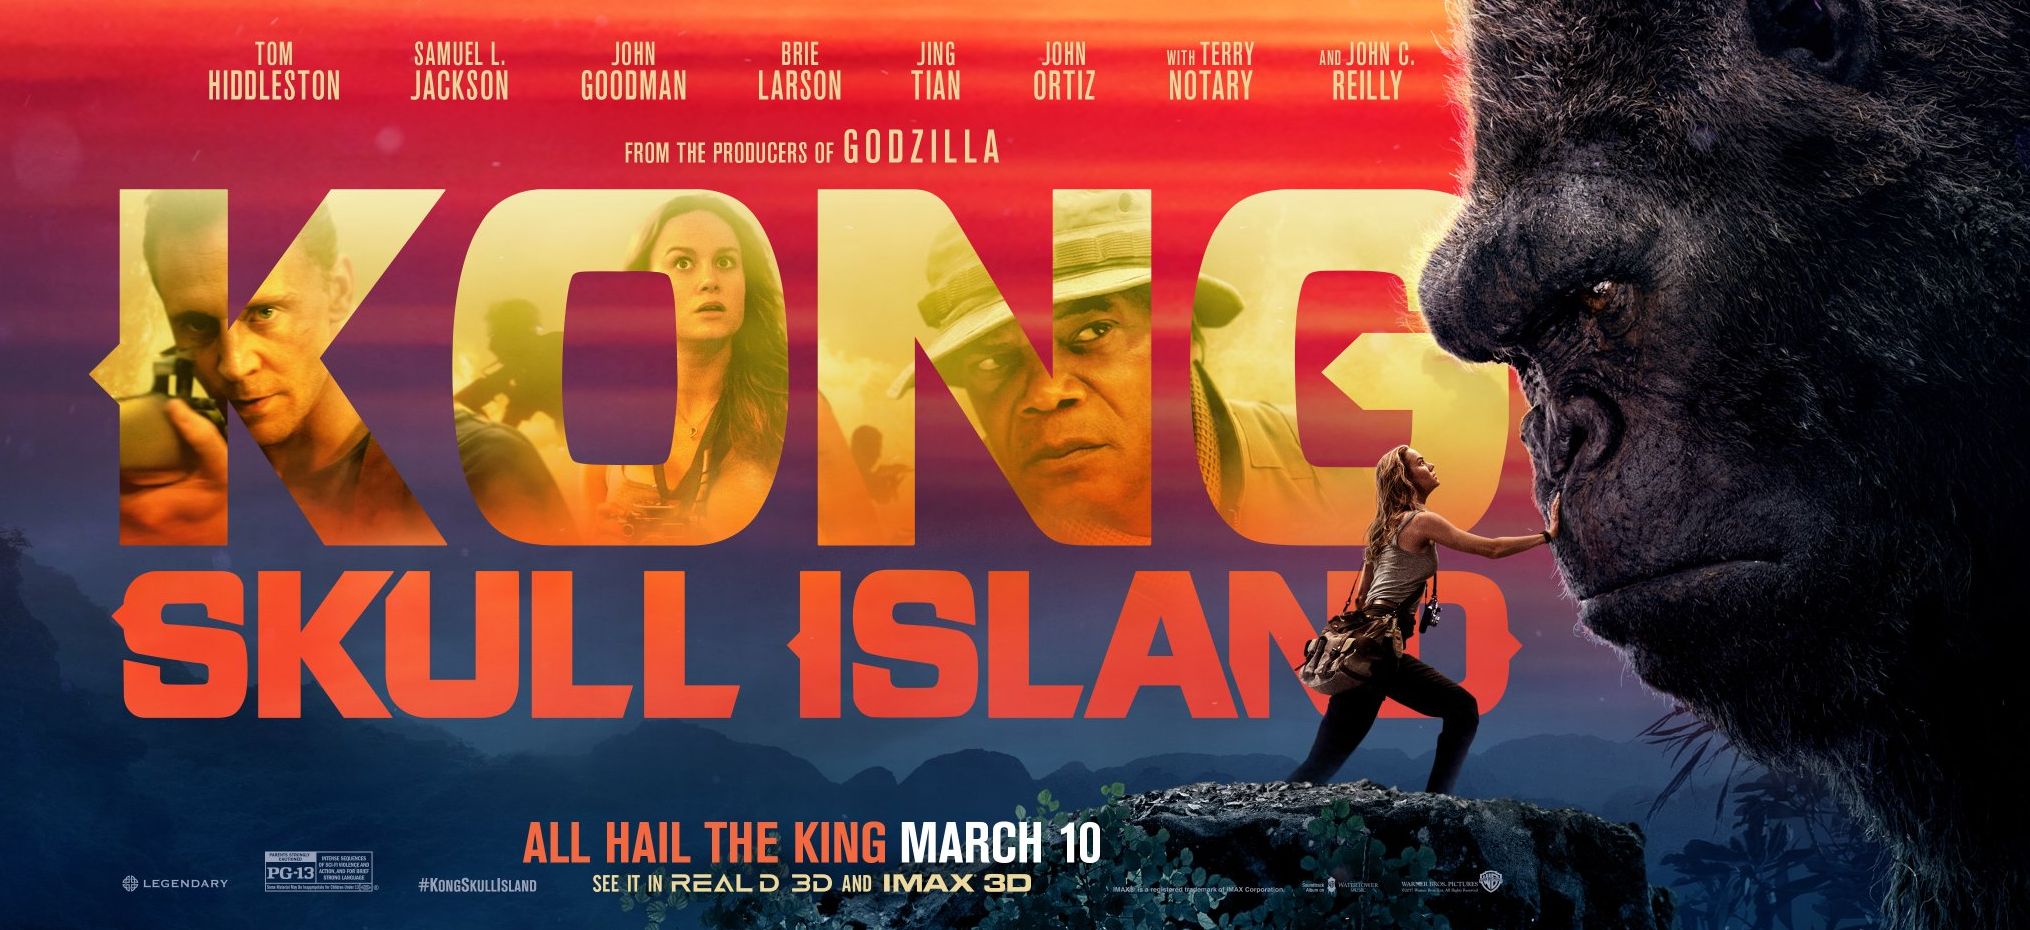 Brie Larson meets the King himself in a new banner for &#039;Kong